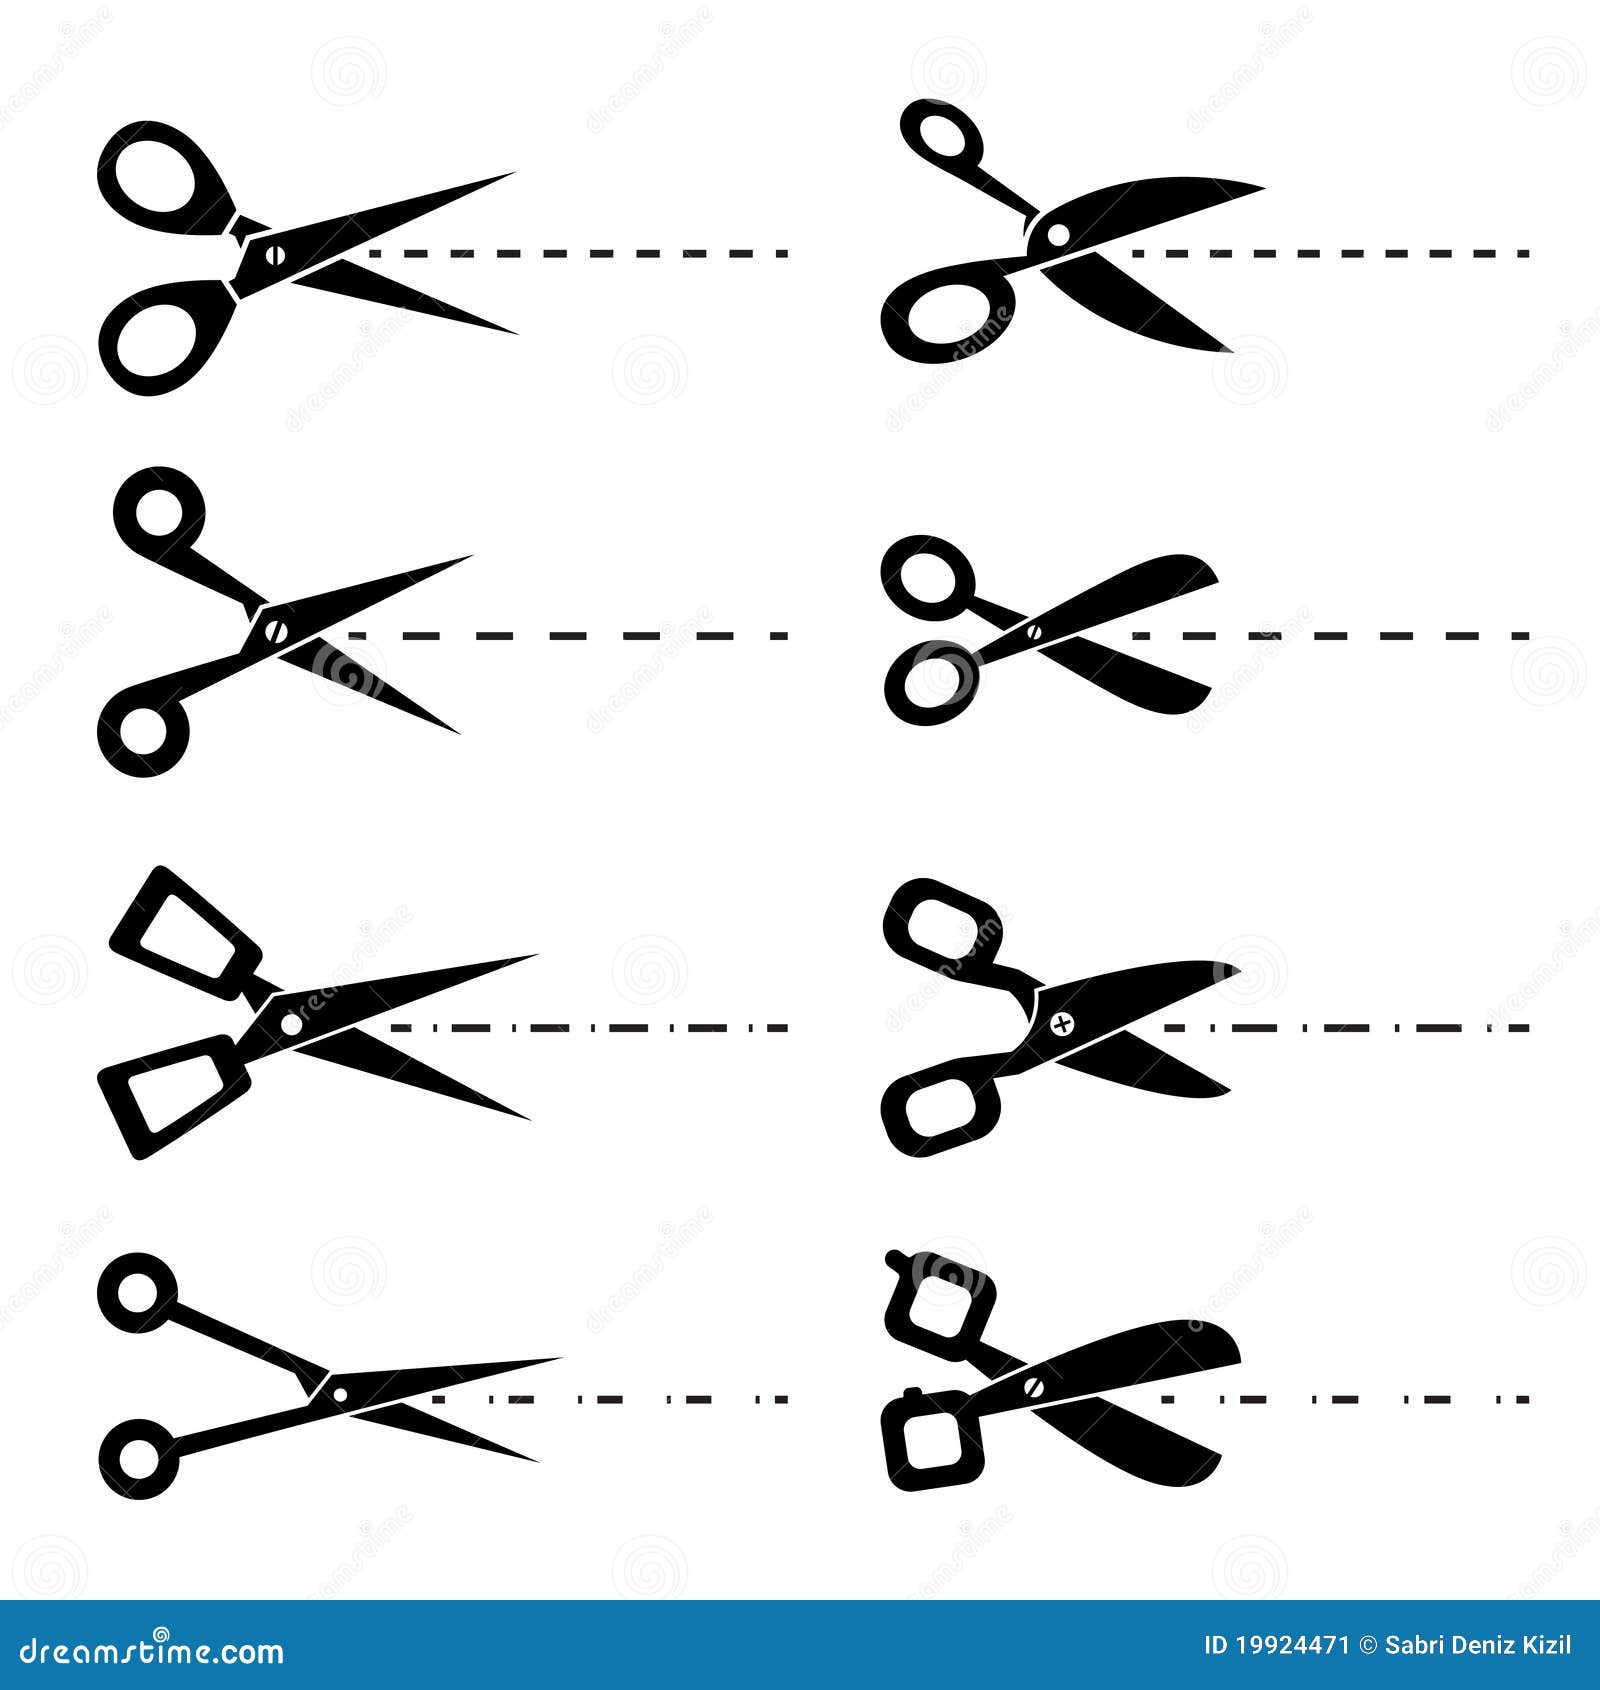 scissors with cut lines